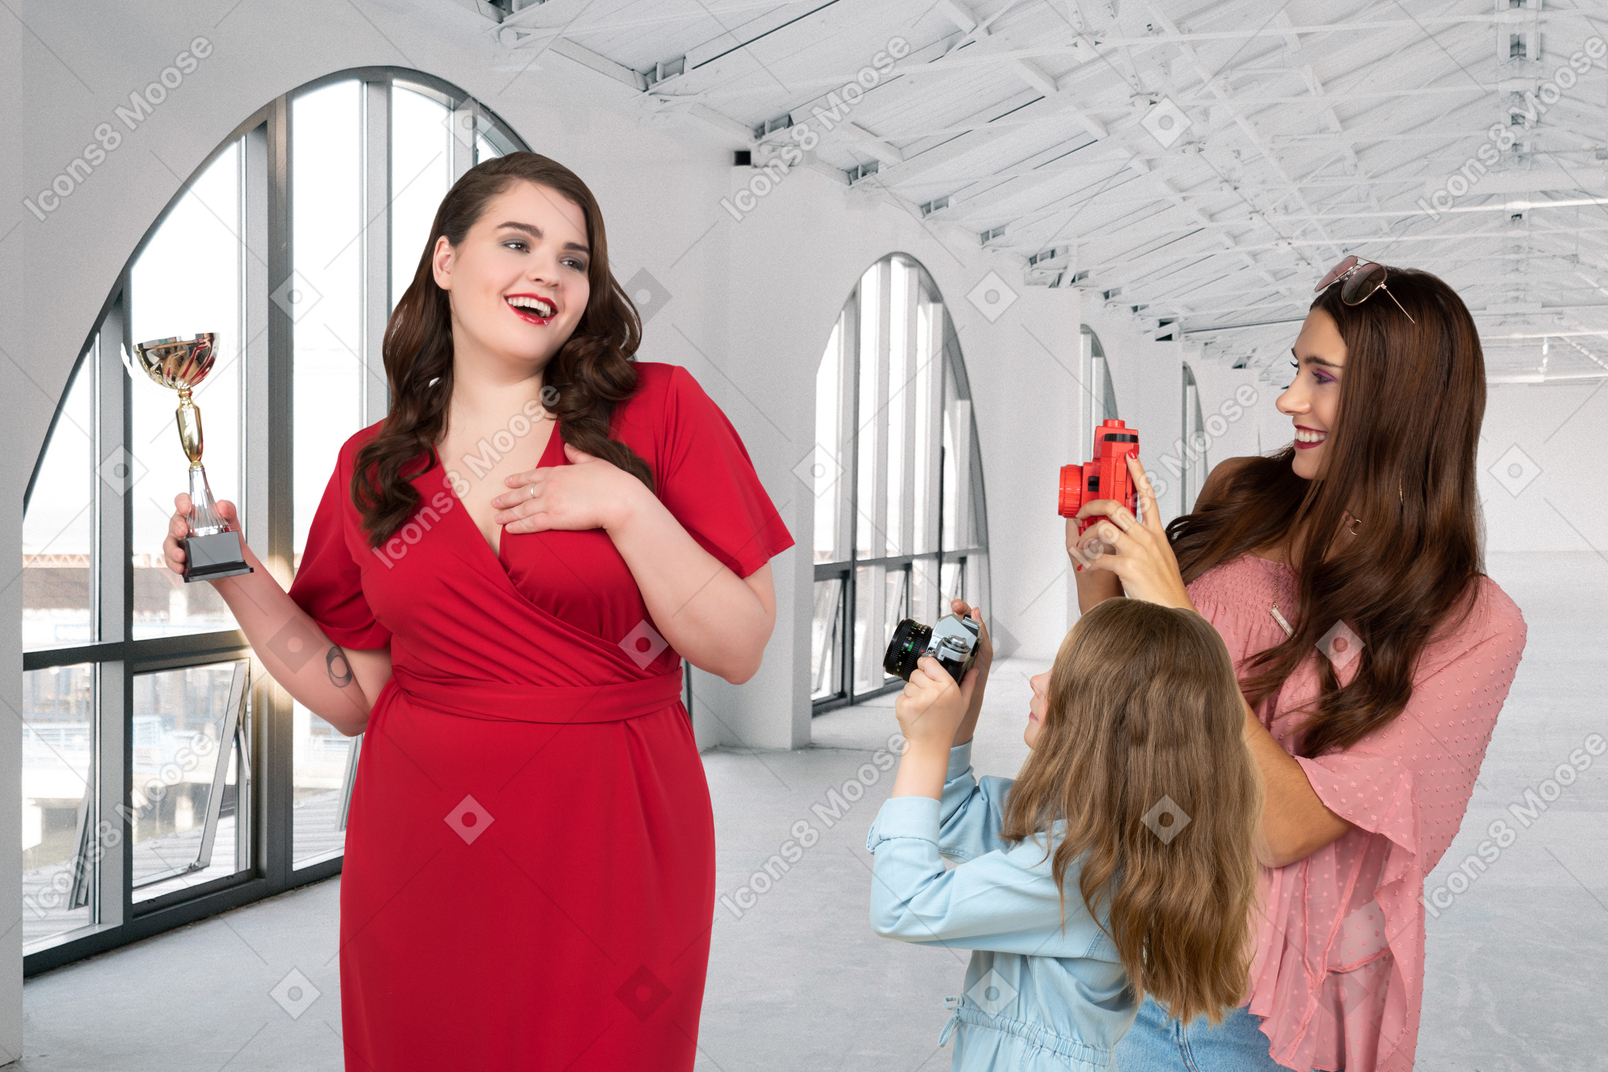 Woman and girl taking a picture of a woman in a red dress